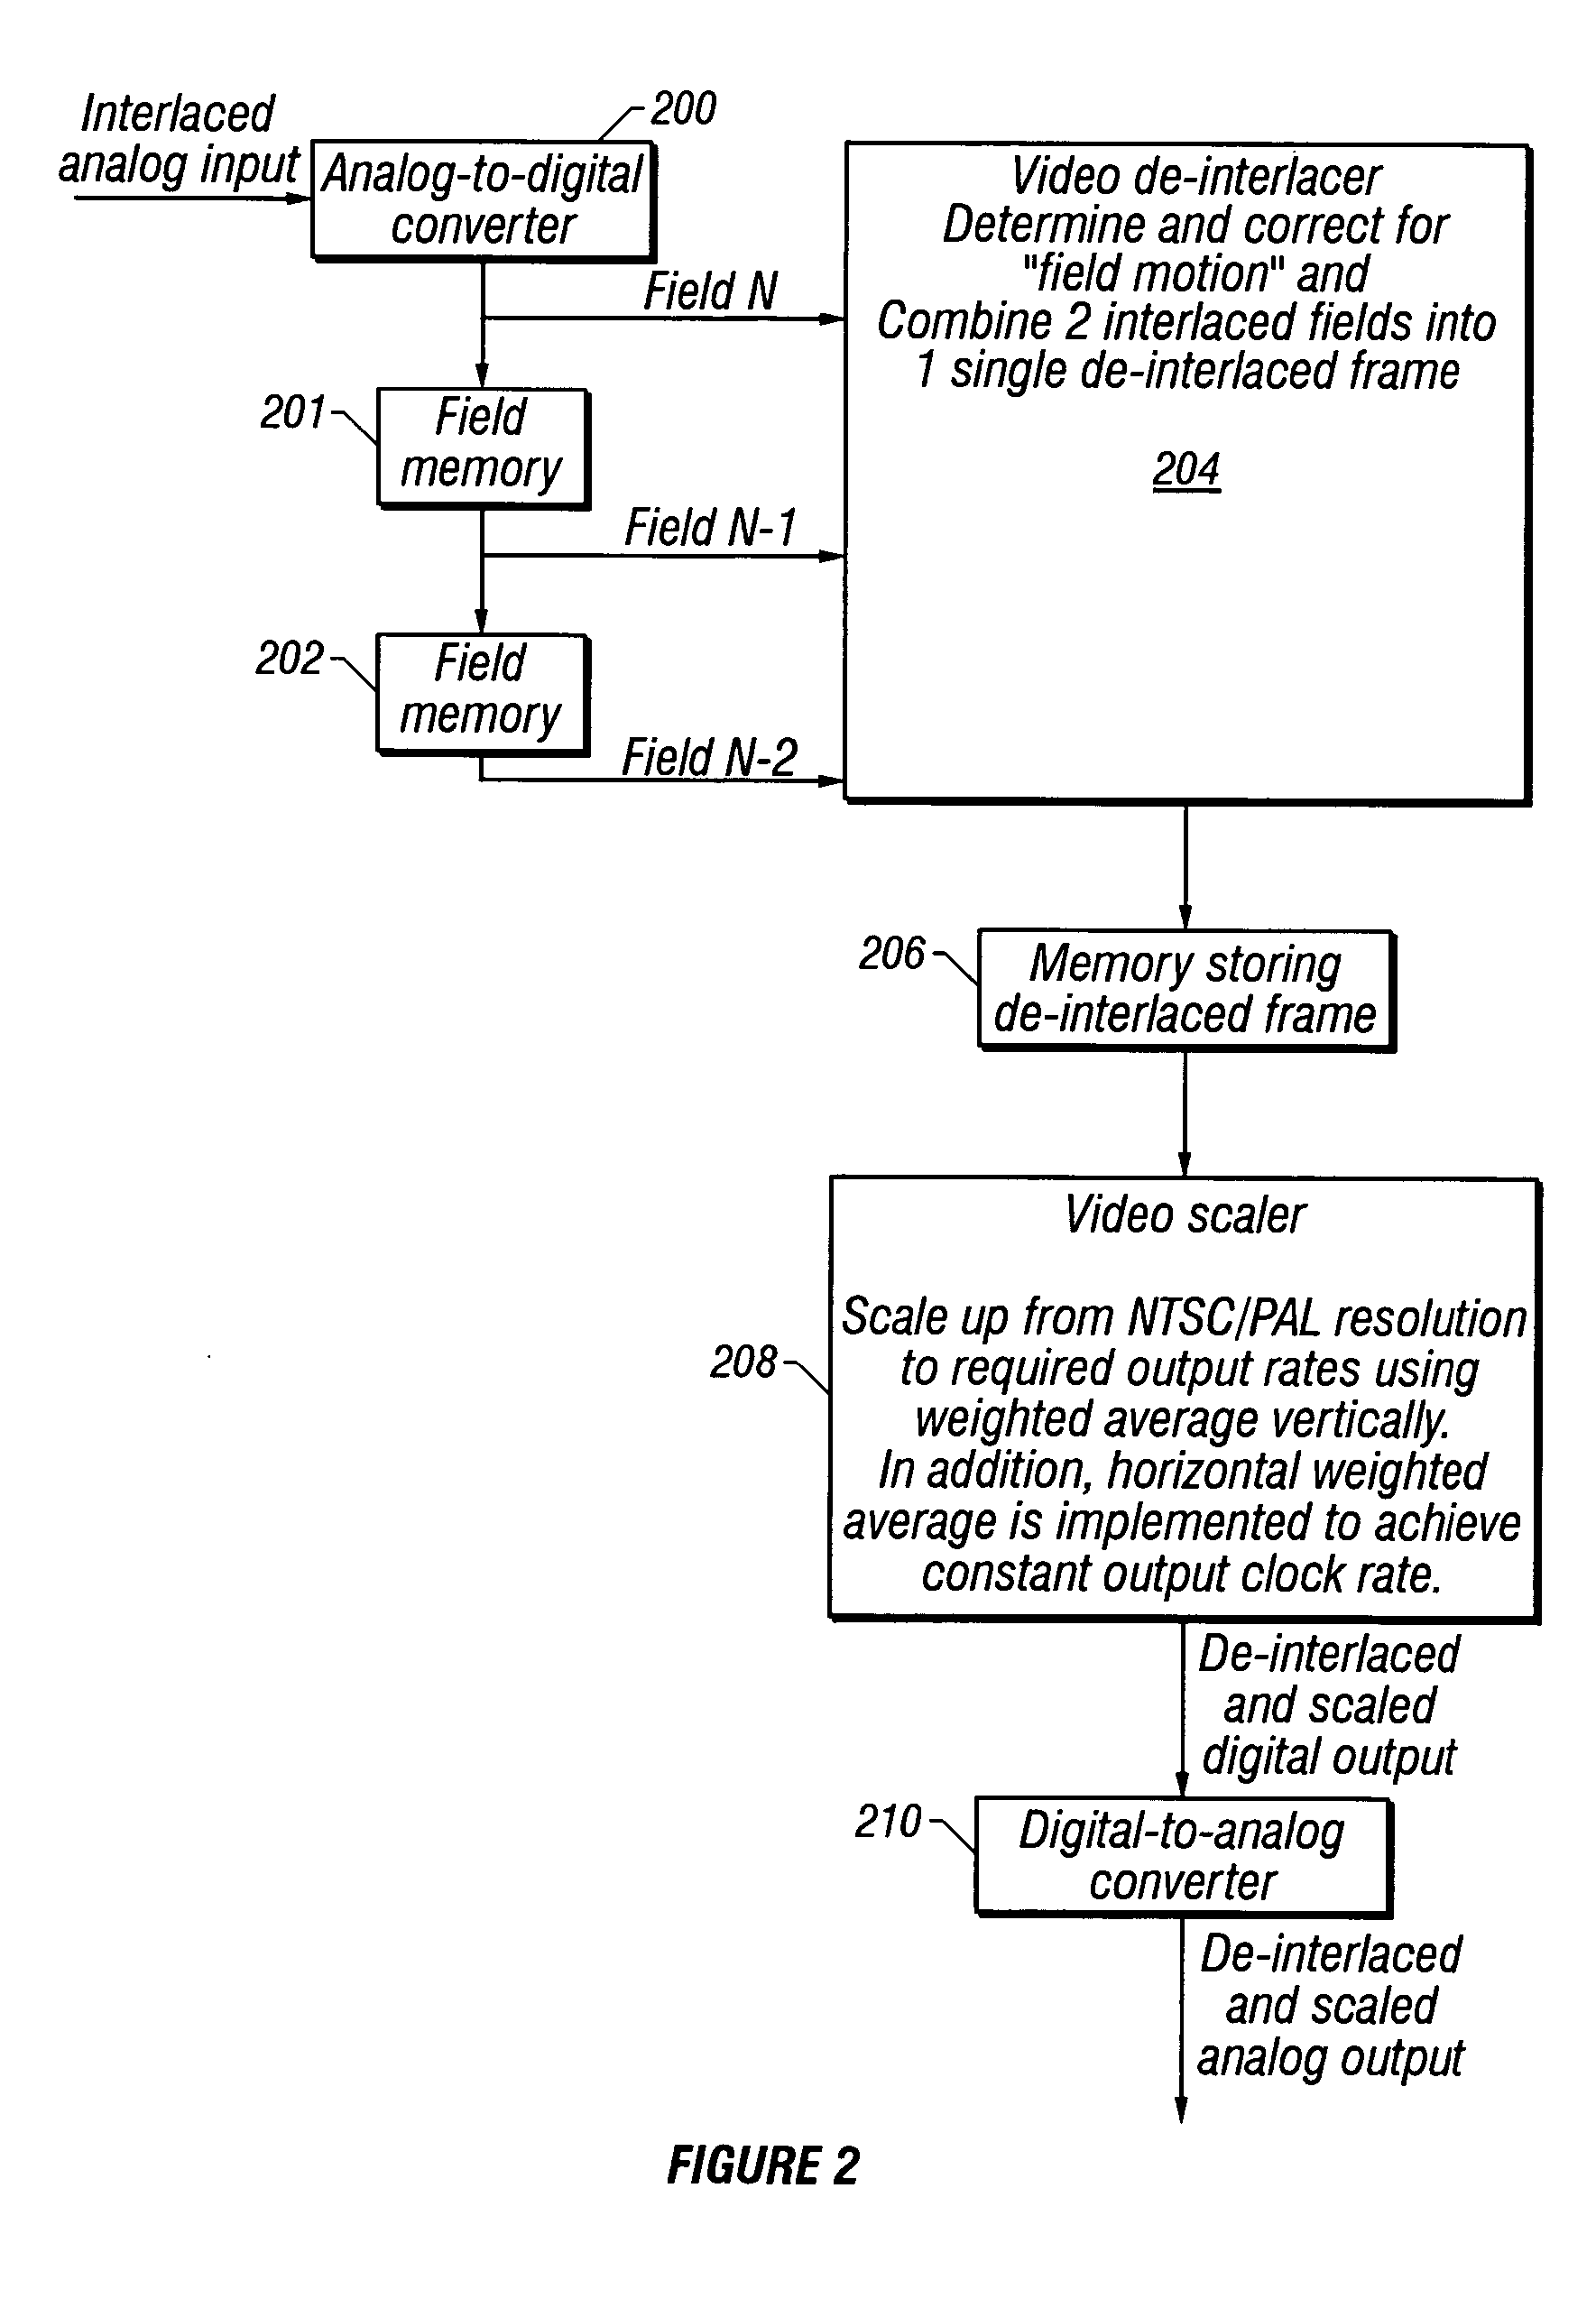 Method and apparatus for eliminating motion artifacts from video